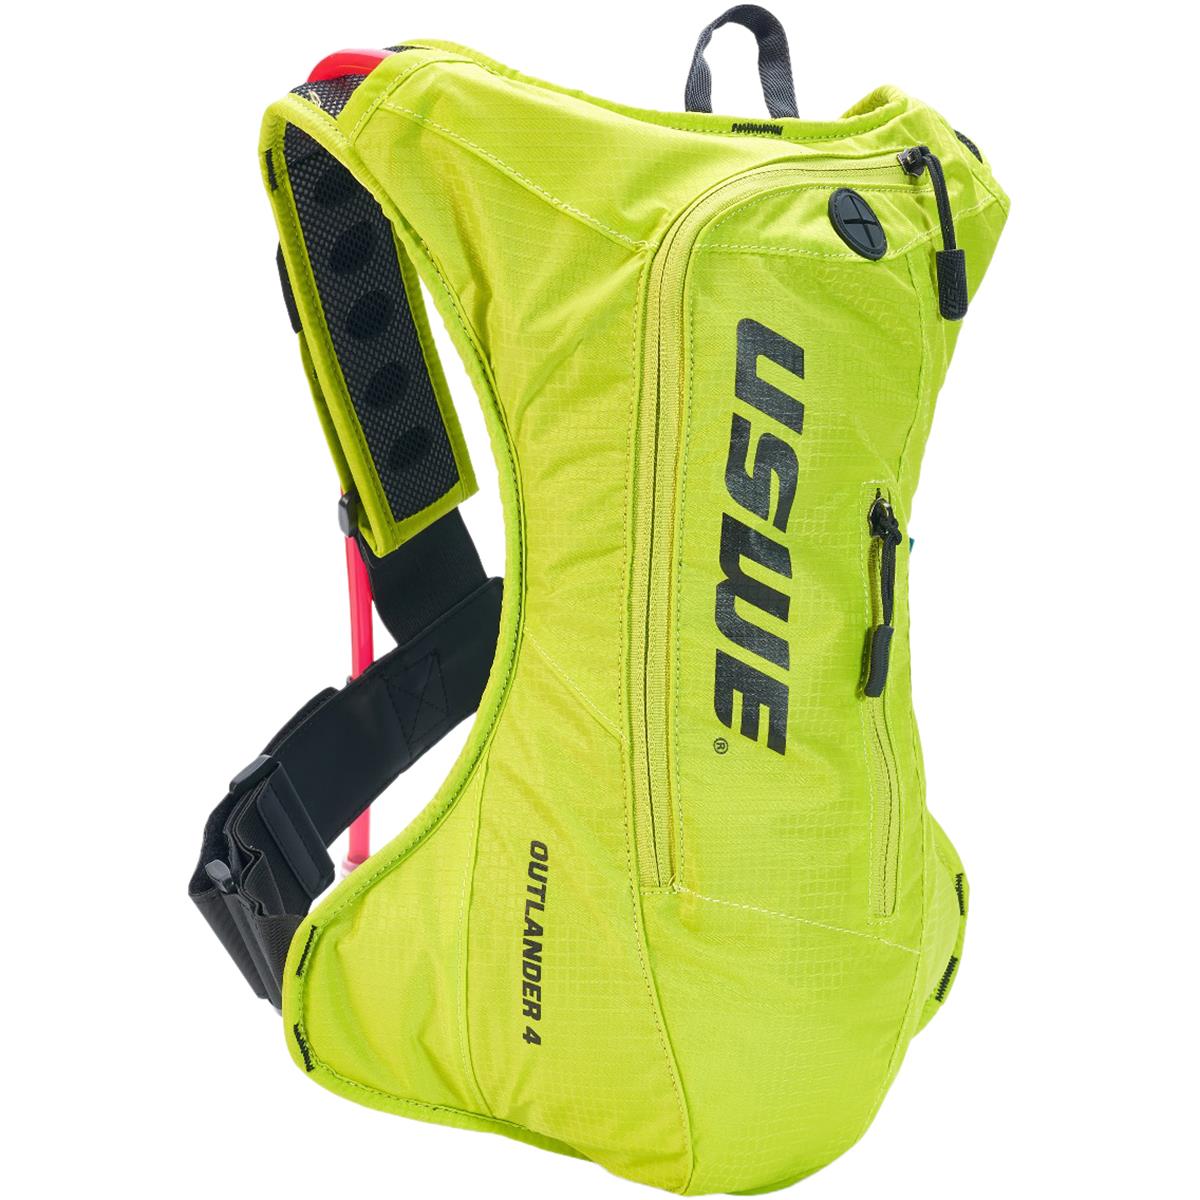 USWE Hydration Pack Outlander 4 Yellow